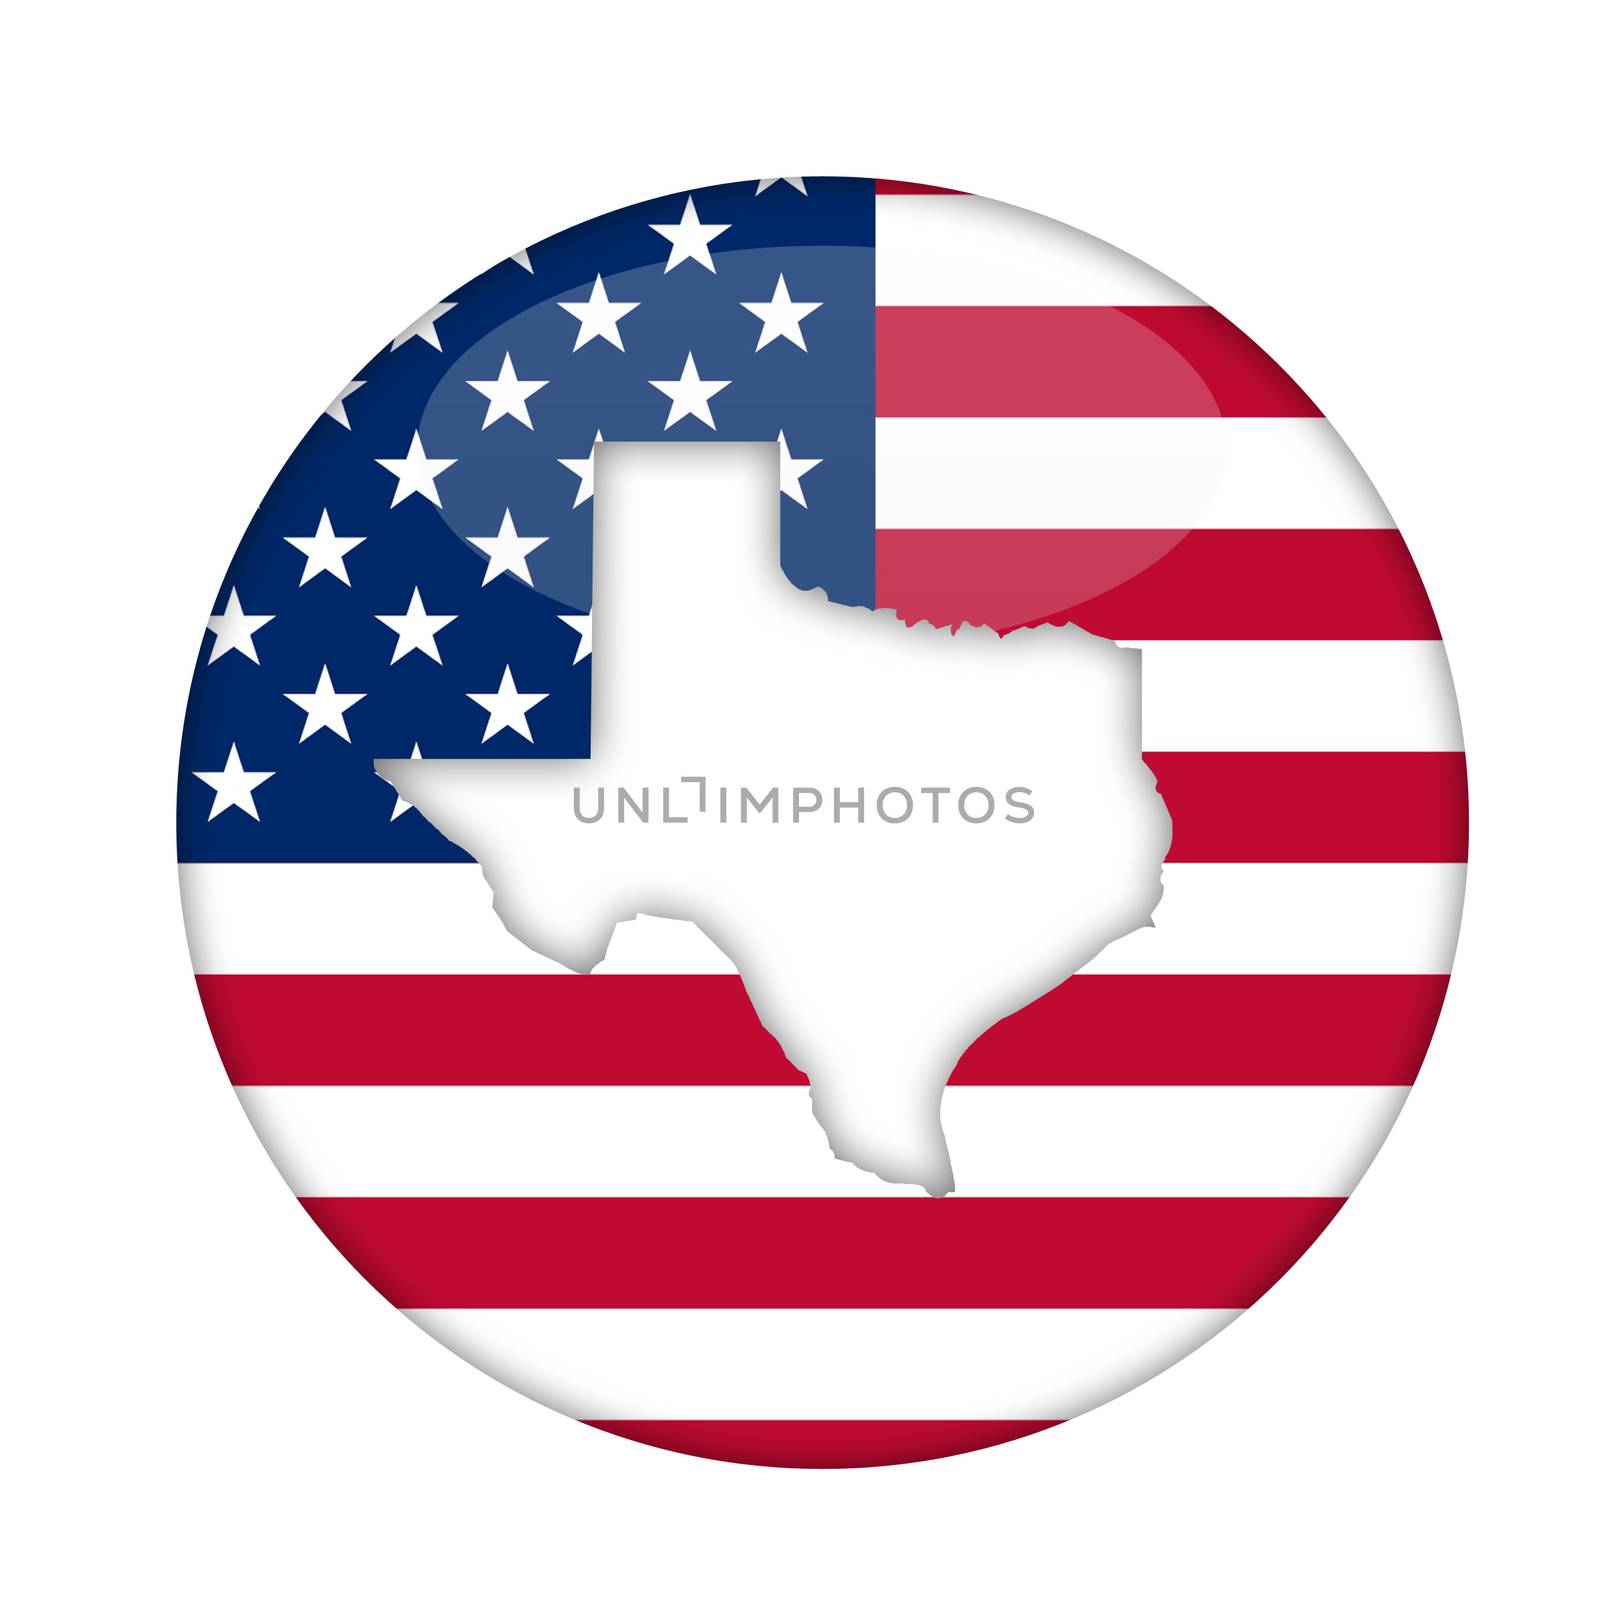 Texas state of America badge isolated on a white background.